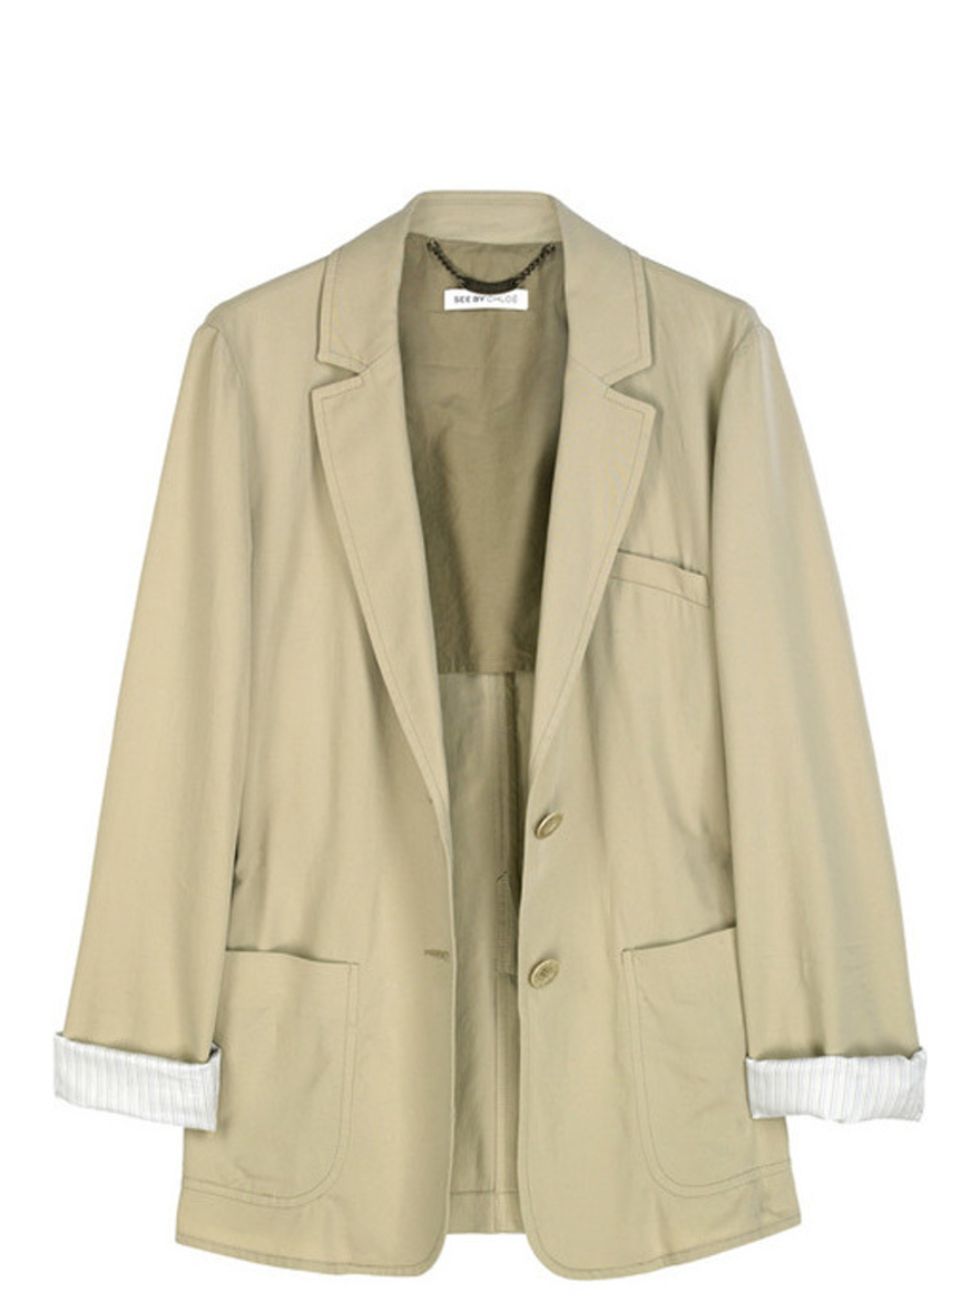 <p>Taupe cotton blazer, £450, by See by Chloe at <a href="http://www.net-a-porter.com/product/79528">Net-a-Porter </a></p>